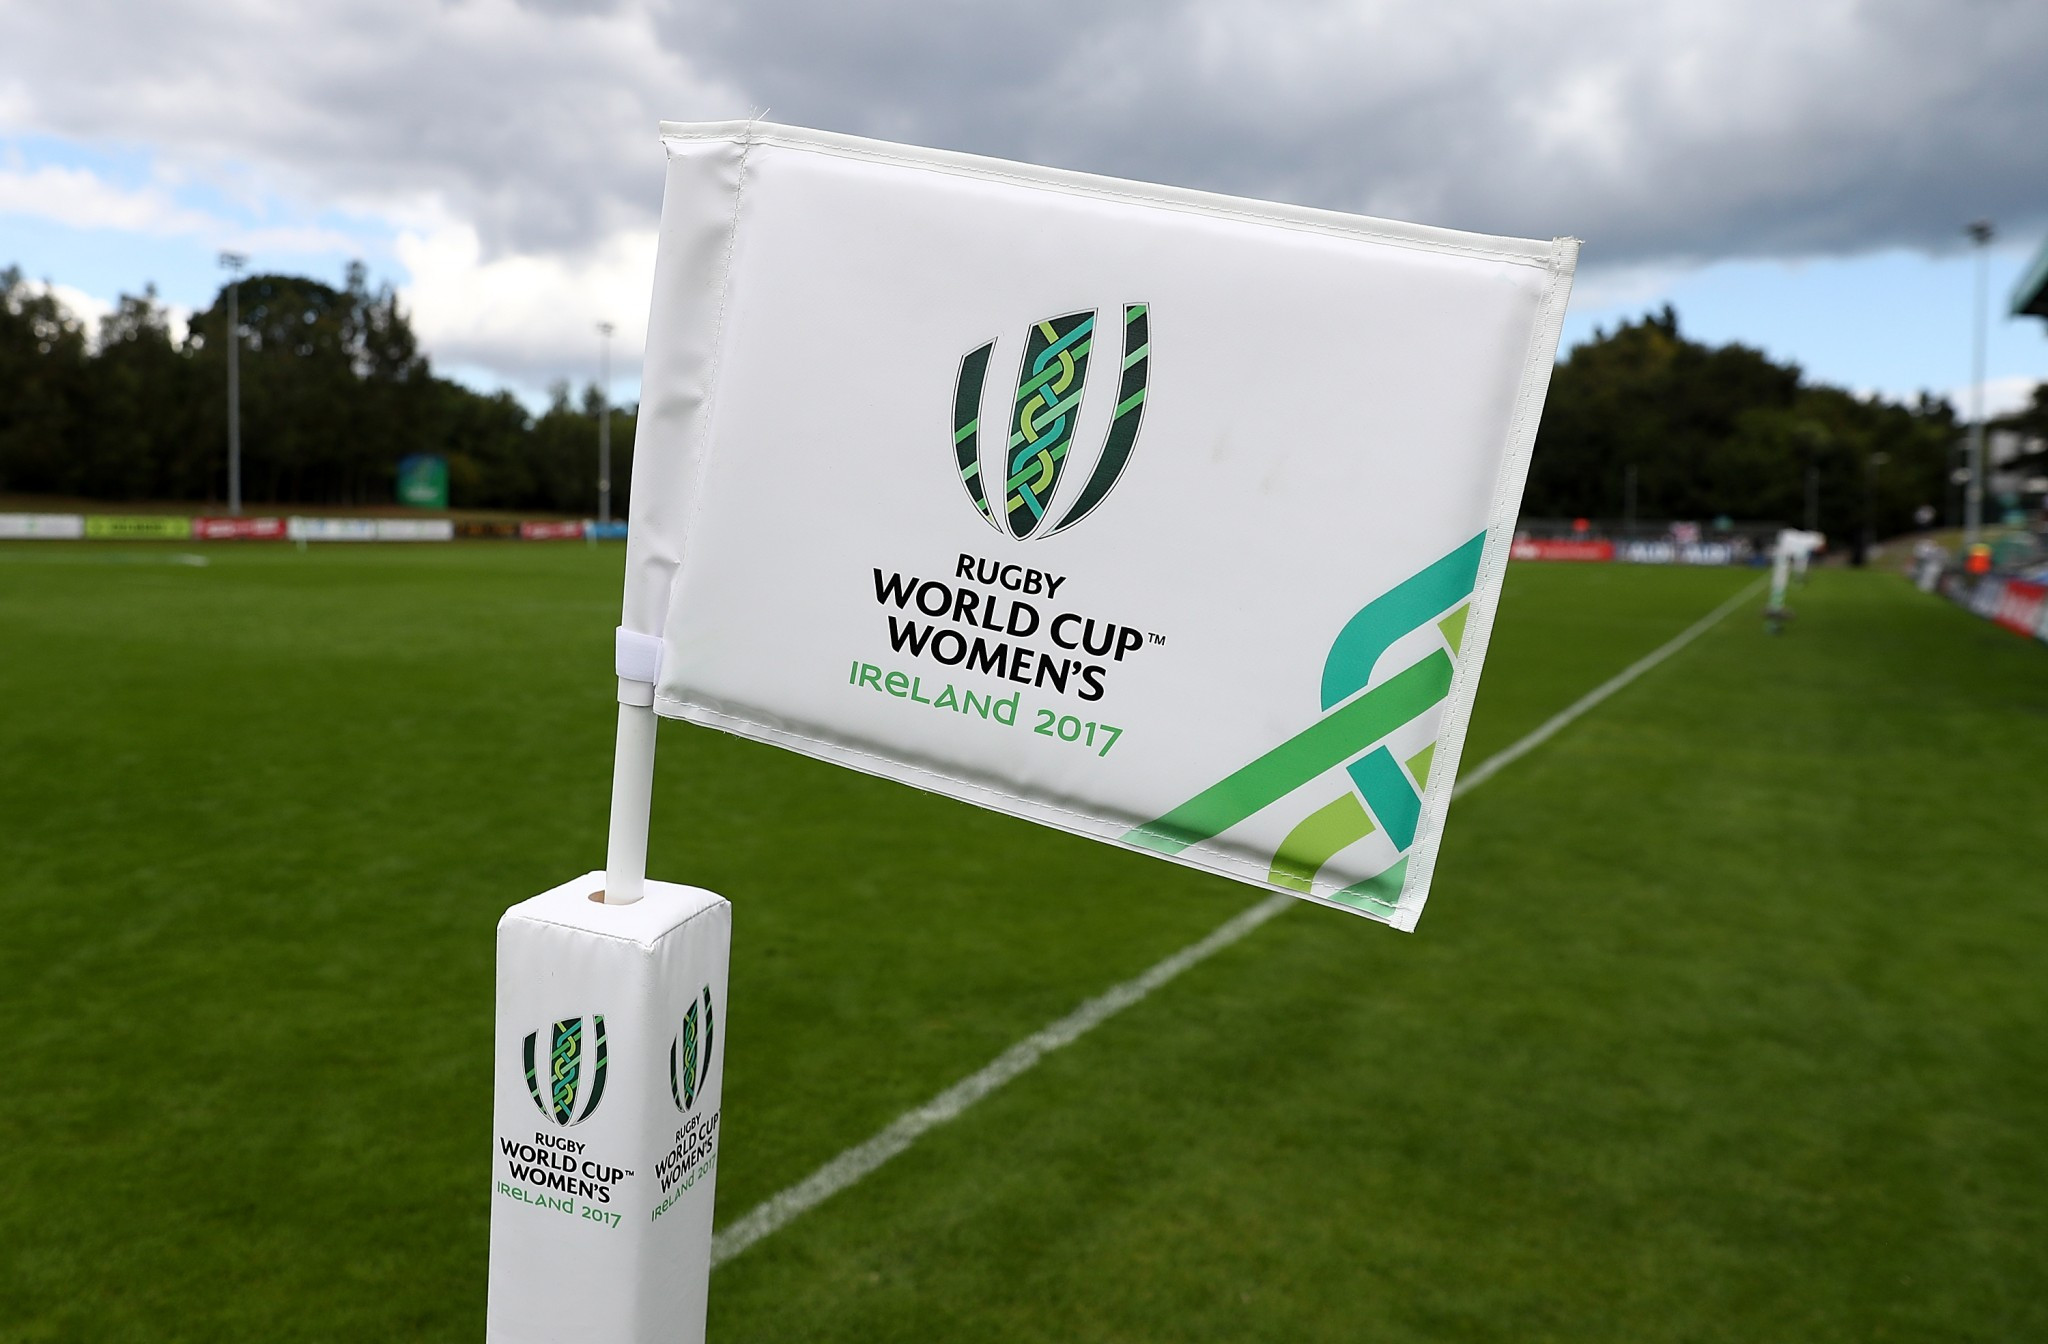 World Rugby have stated they have implemented a comprehensive anti-corruption strategy for the 2017 Women’s Rugby World Cup ©Getty Images